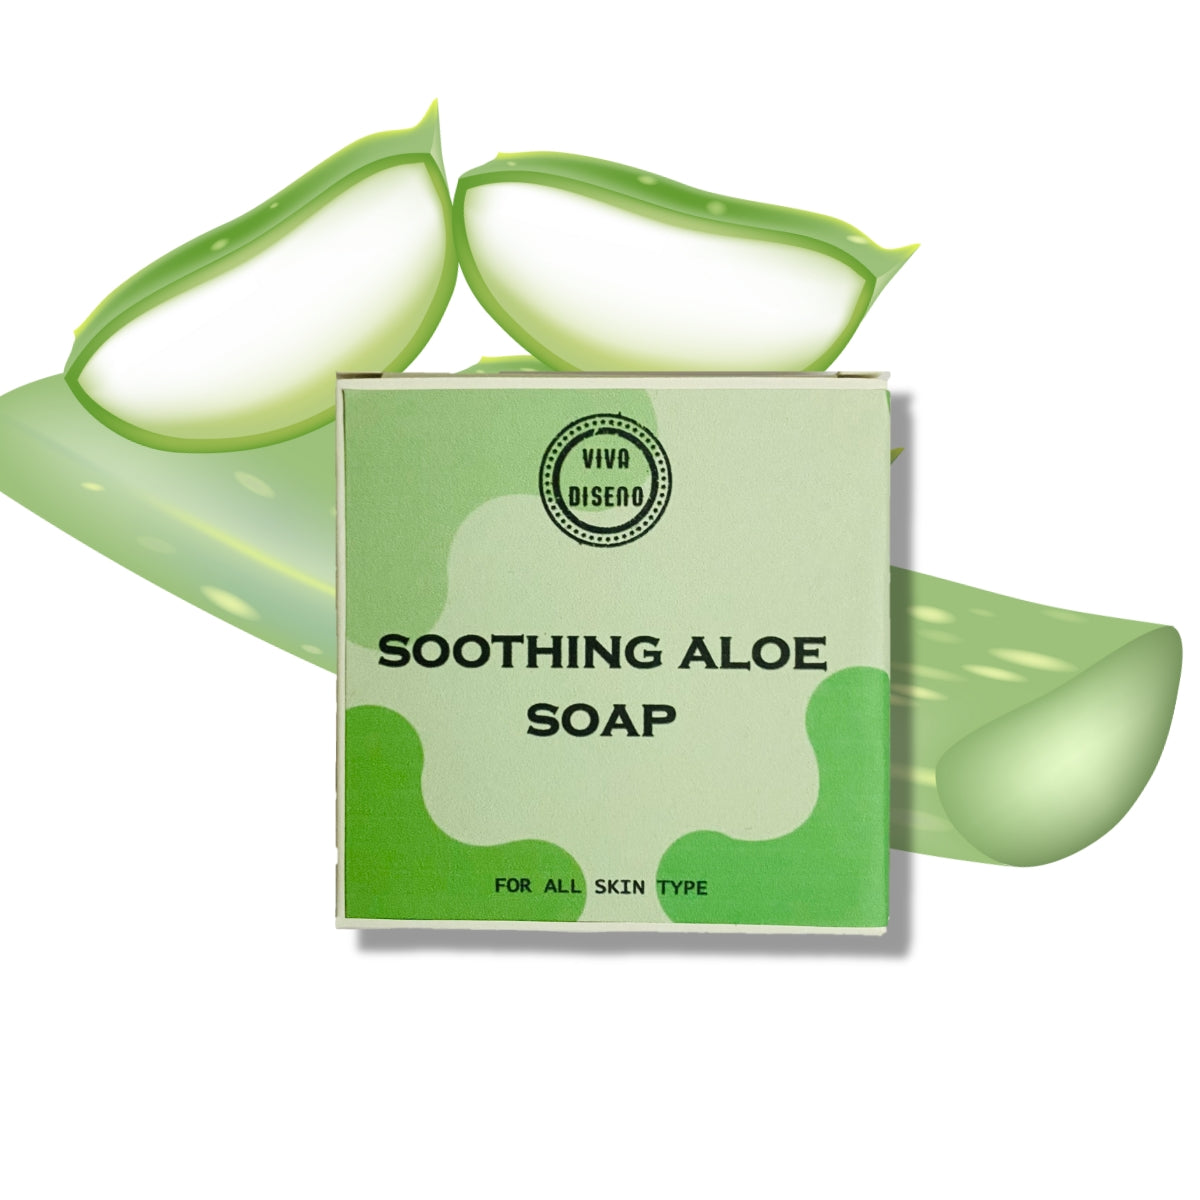 Tiarrah Soothing Aloe Soap: Natural, Organic, Non-Toxic - The Luxury Bath and Body Care Shop